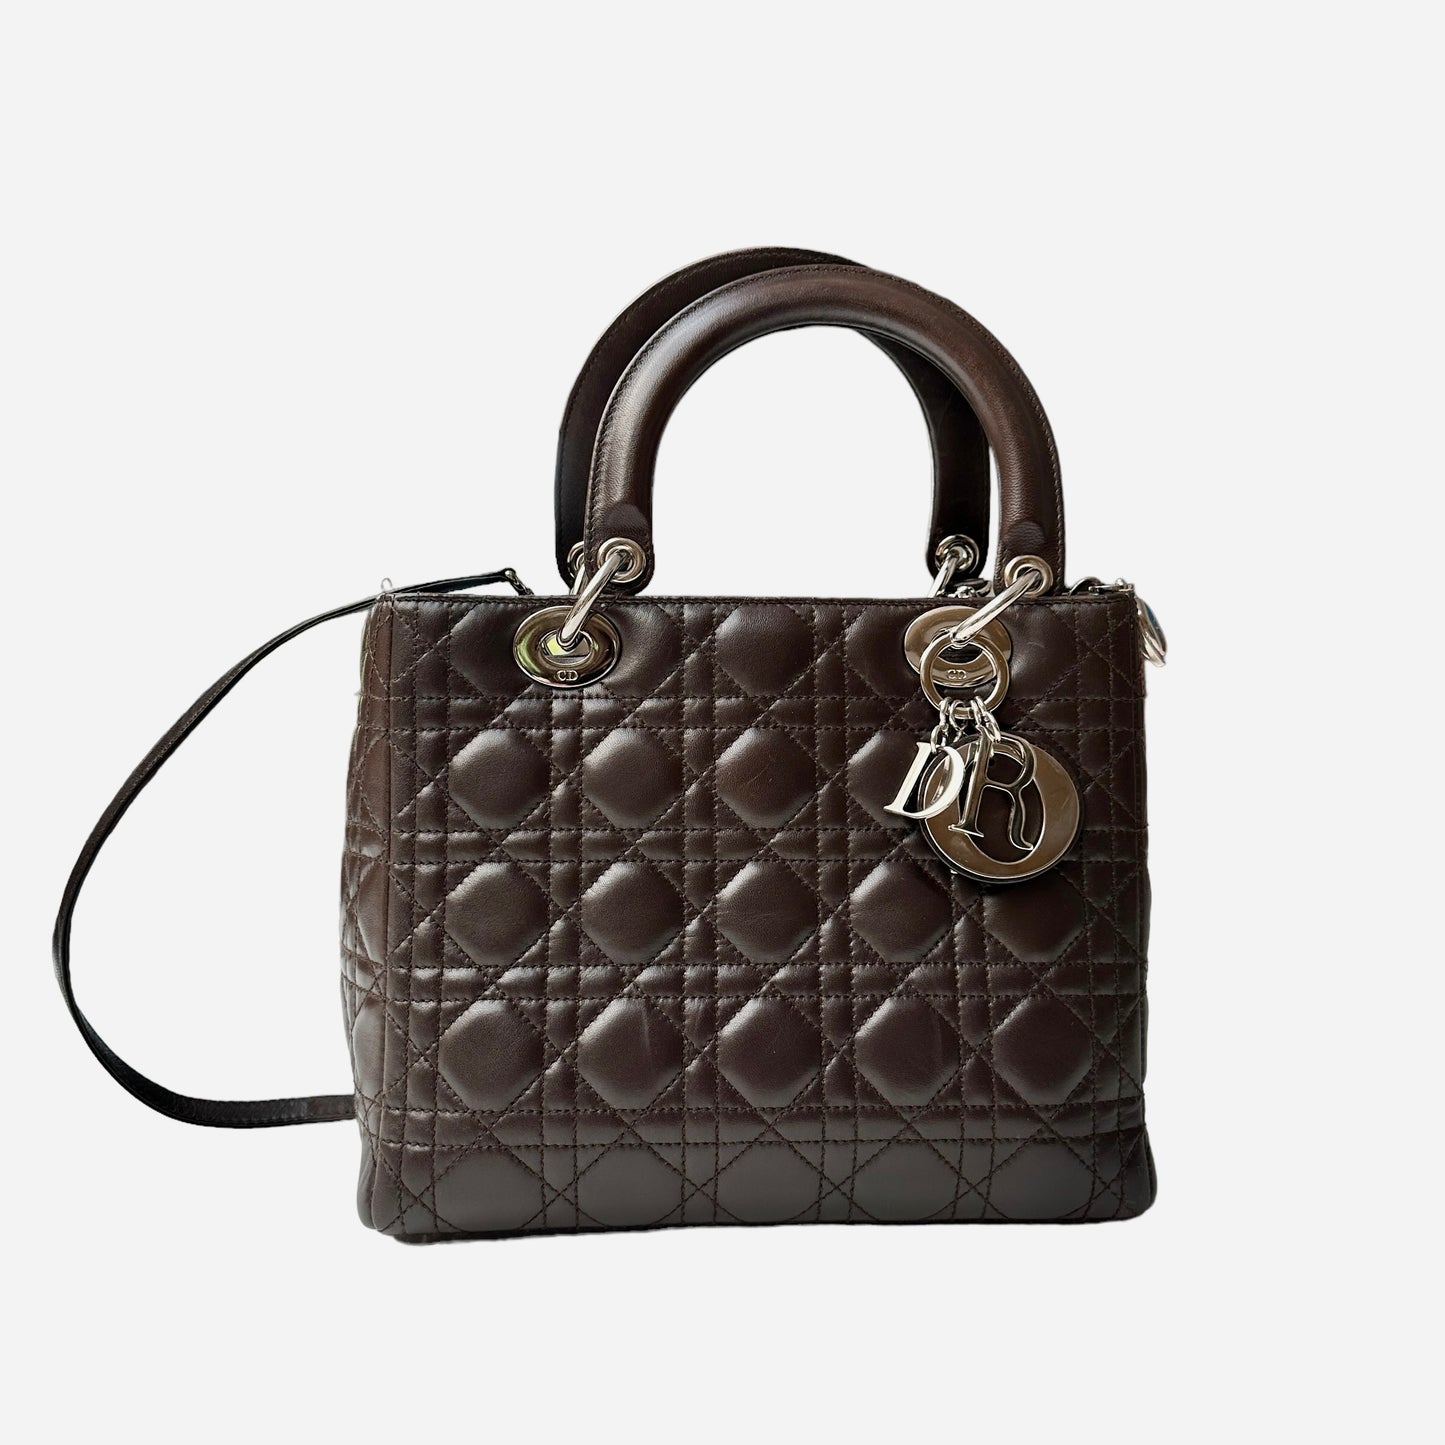 Chocolate Brown Lady Dior Tote